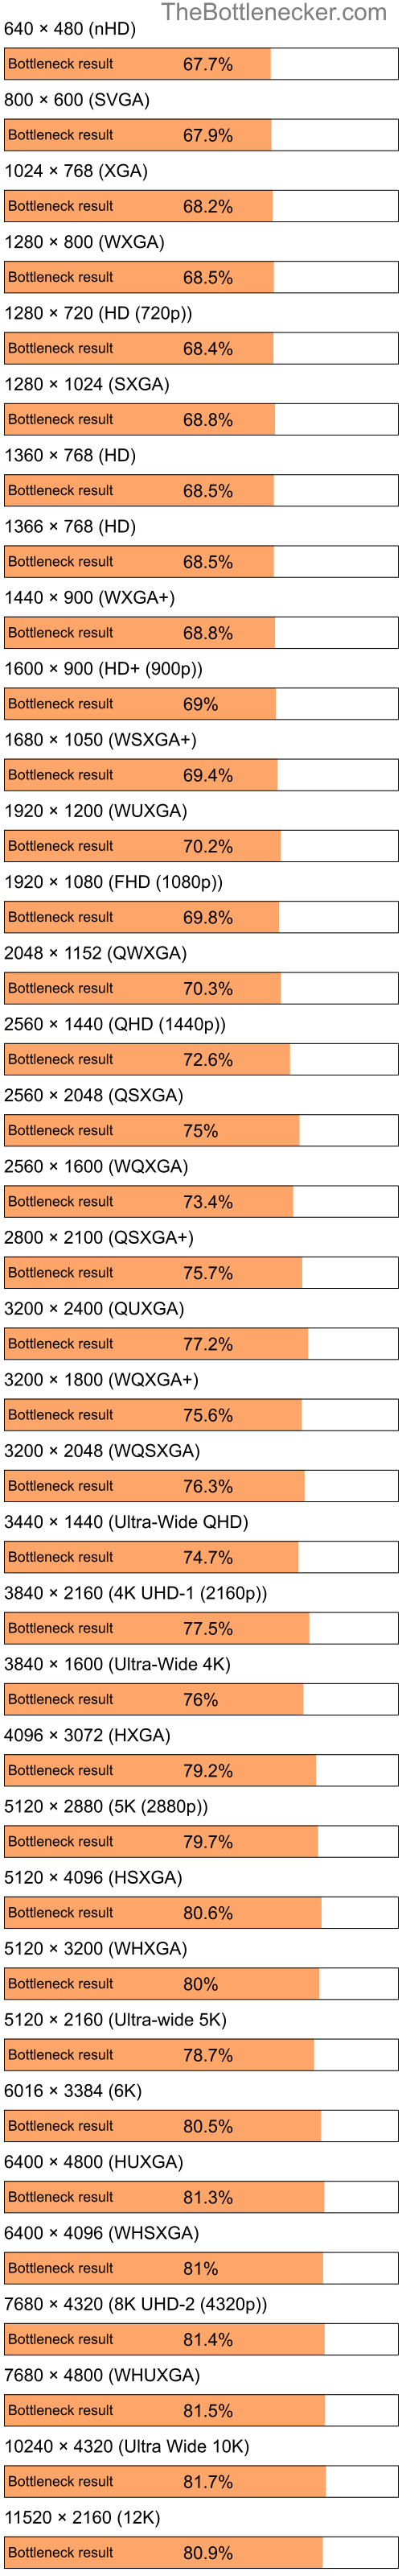 Bottleneck results by resolution for Intel Celeron and NVIDIA Quadro NVS 140M in General Tasks